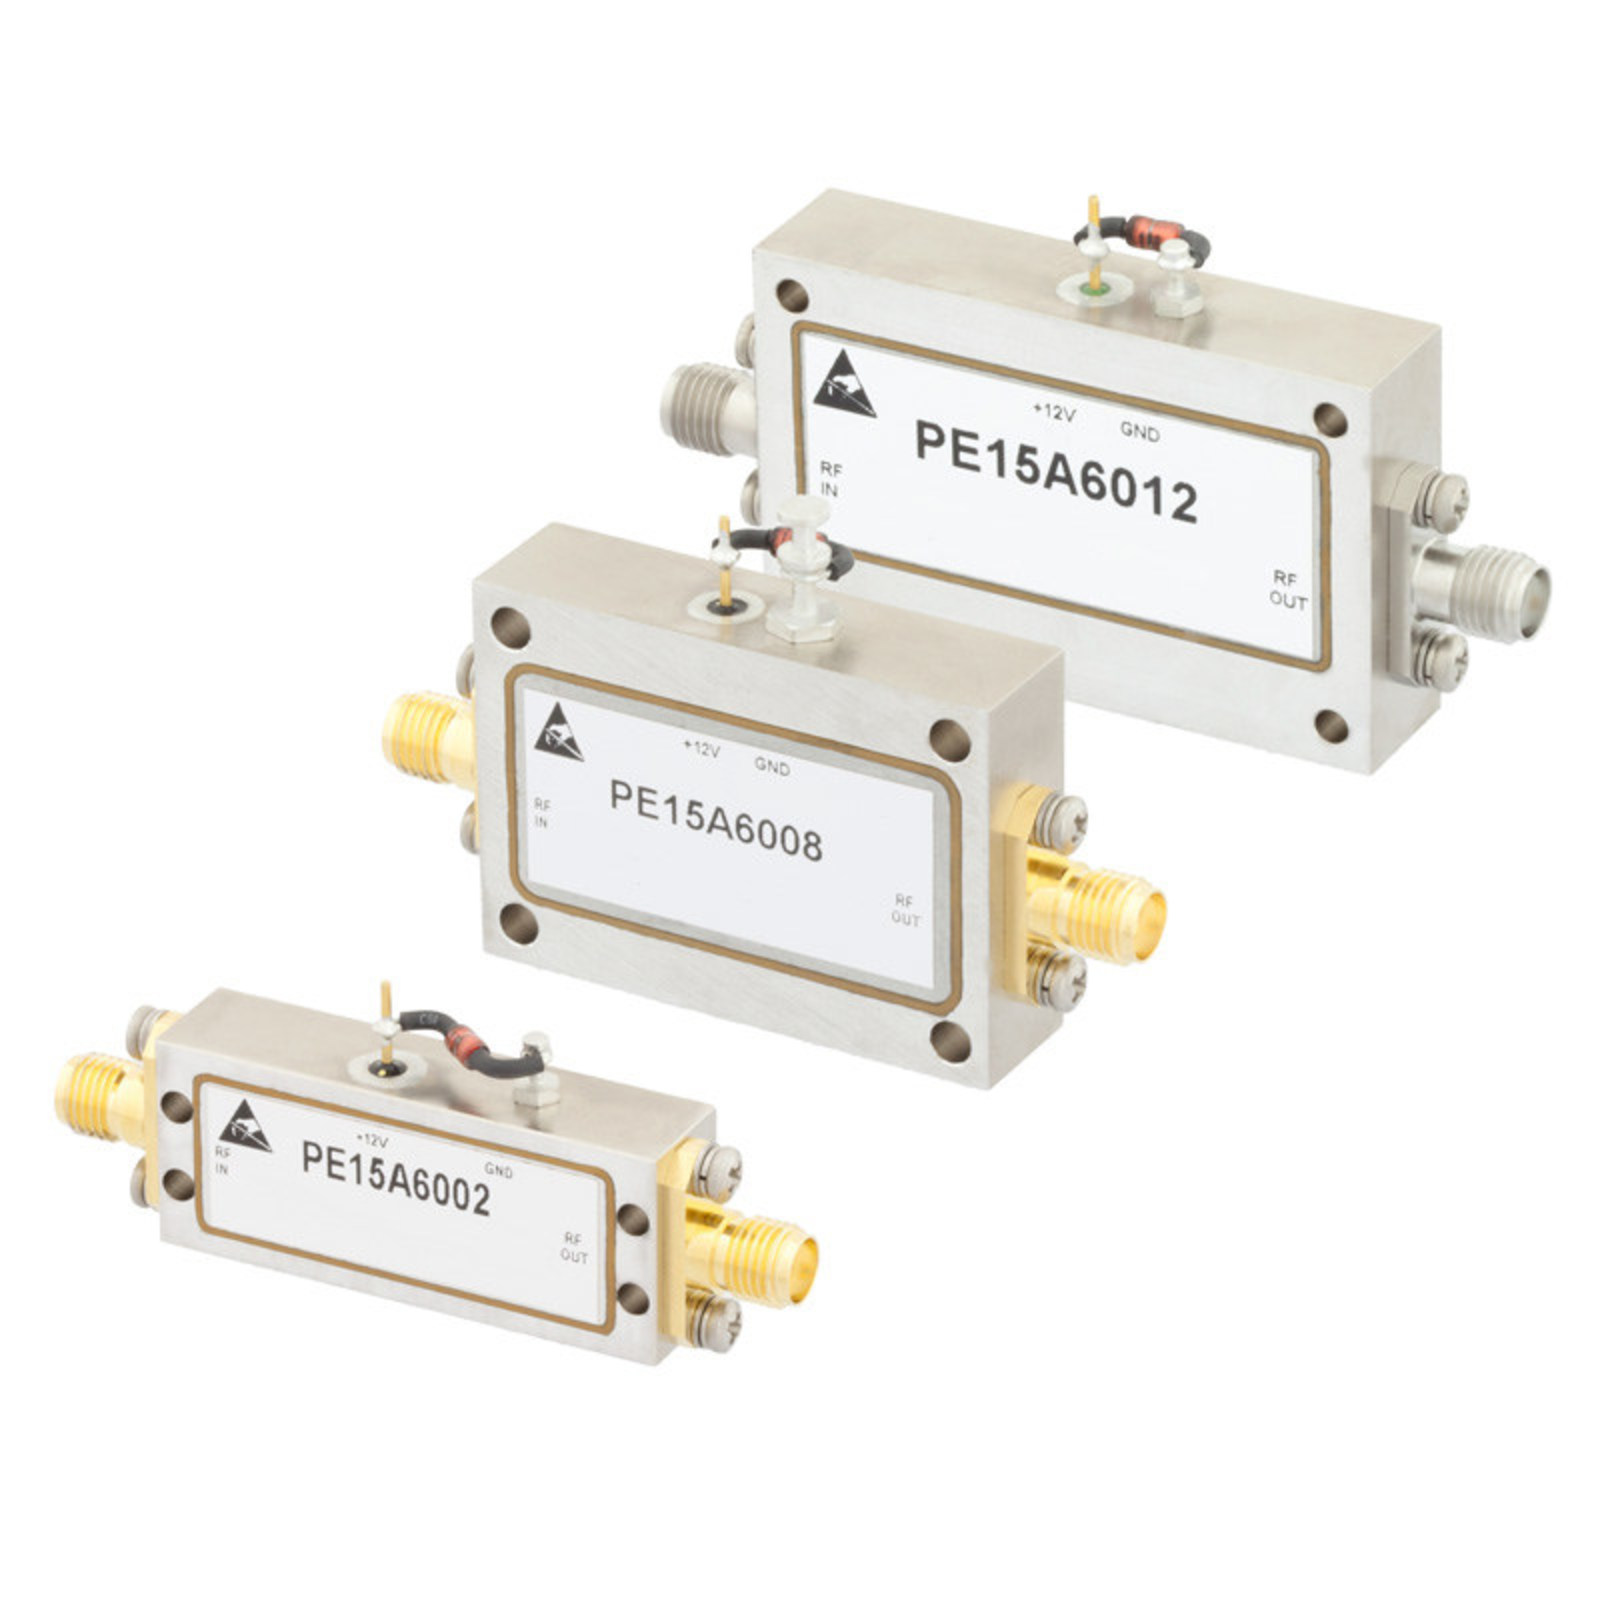 Broadband Limiting Amplifiers from Pasternack